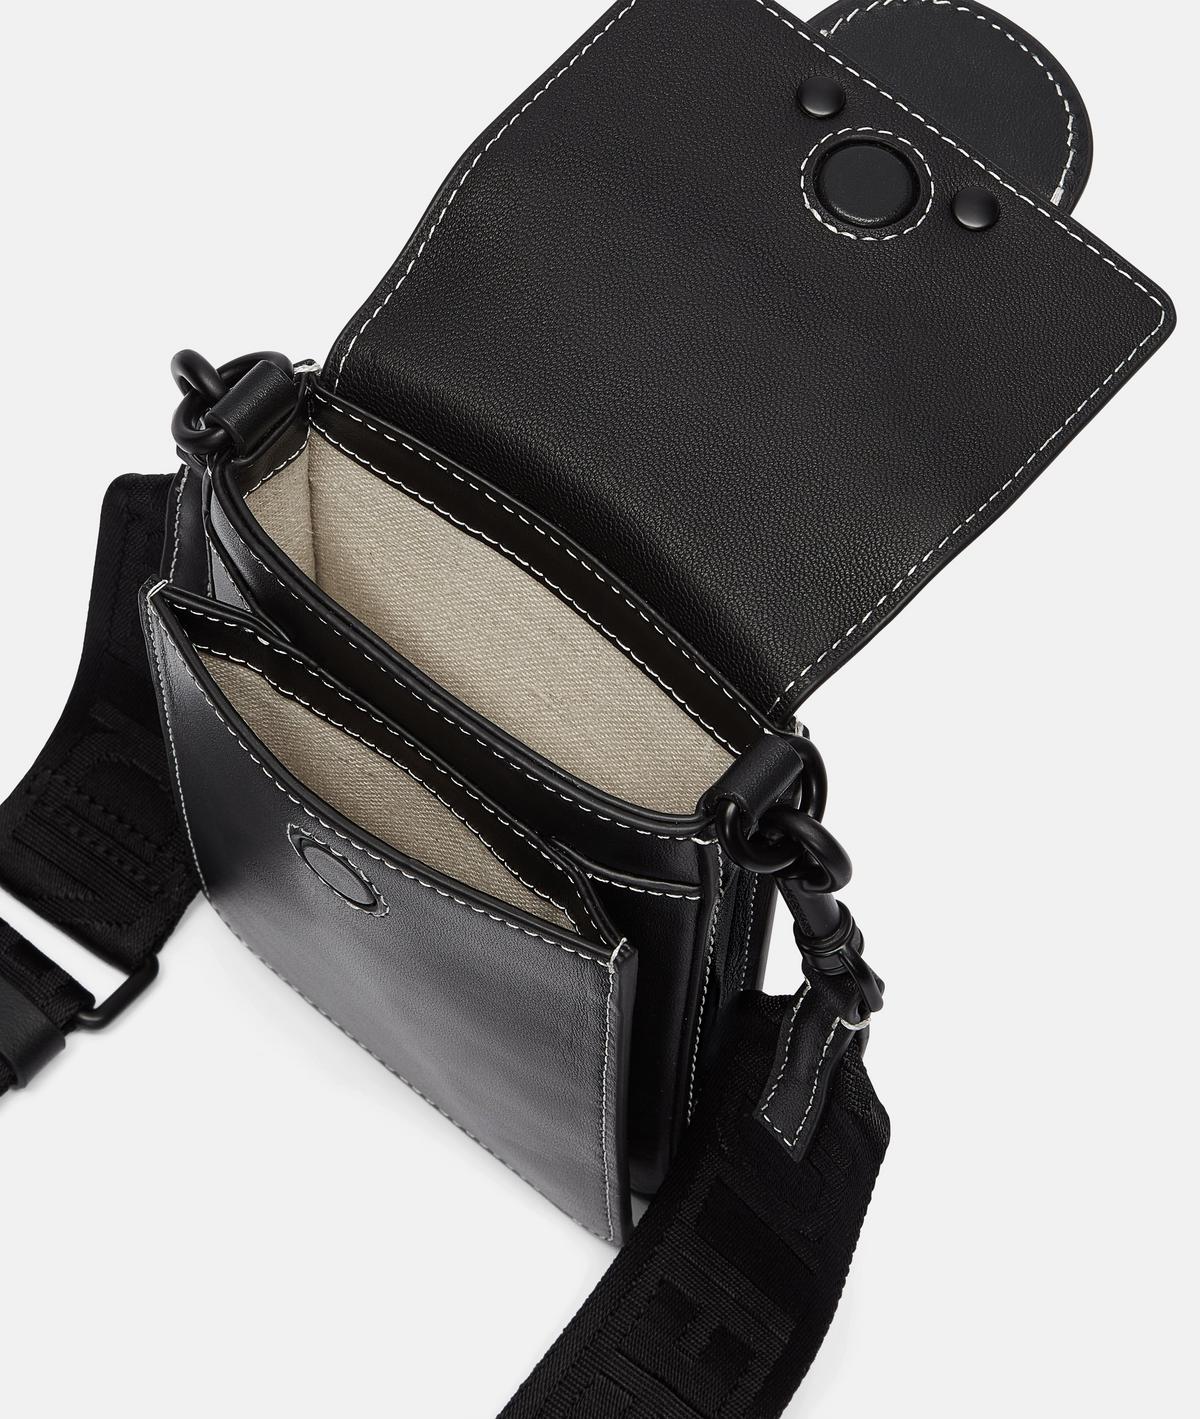 LIEBESKIND BERLIN Pam Mobile Pouch